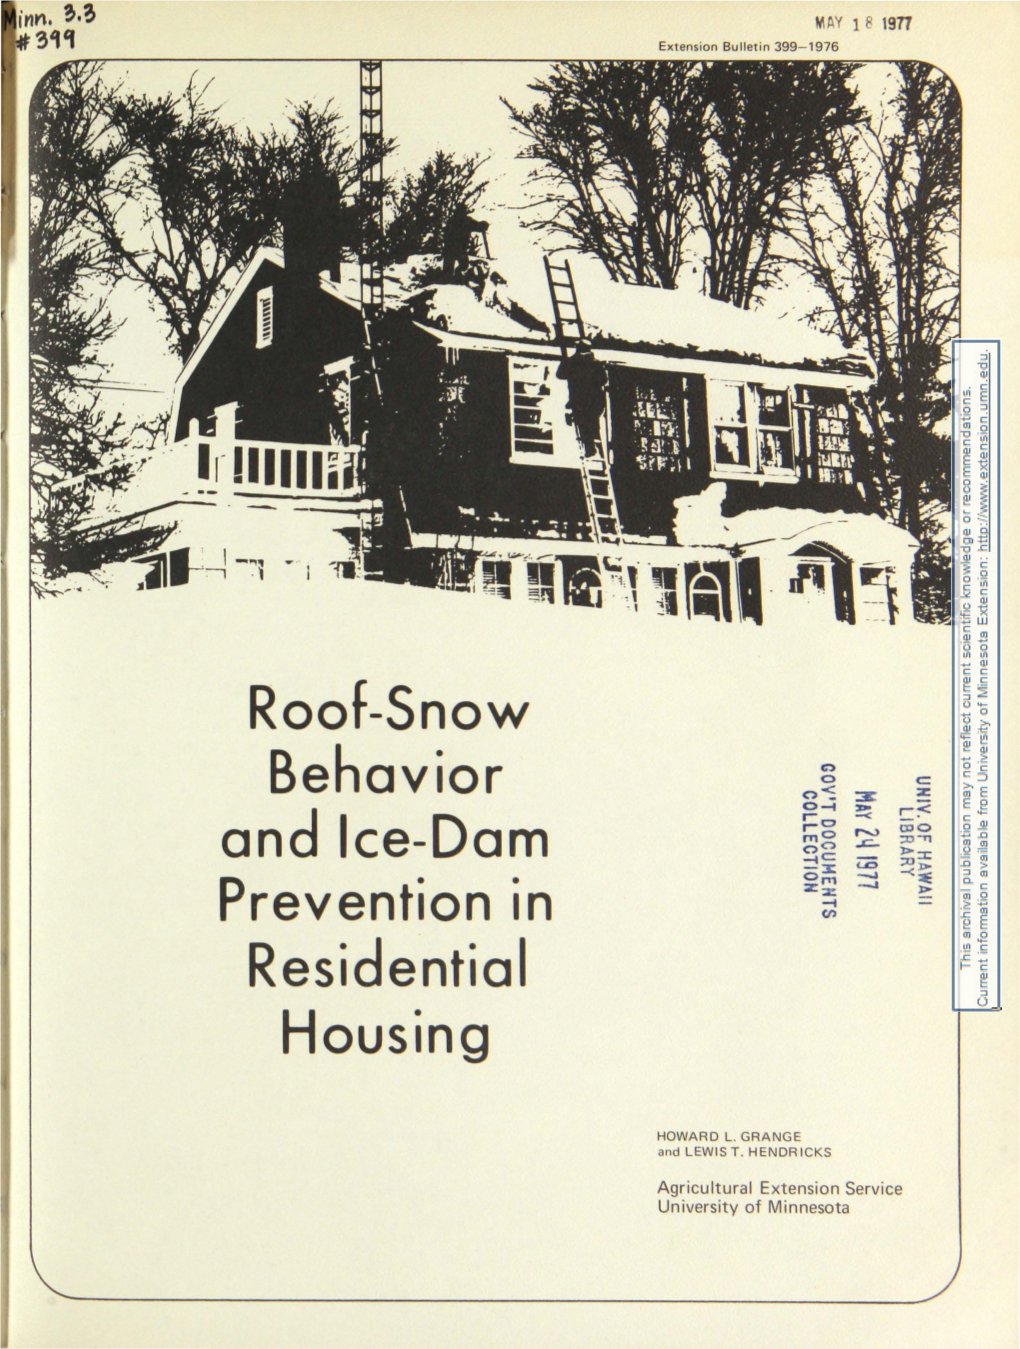 Roof-Snow Behavior and Ice-Dam Prevention in Residential Housing